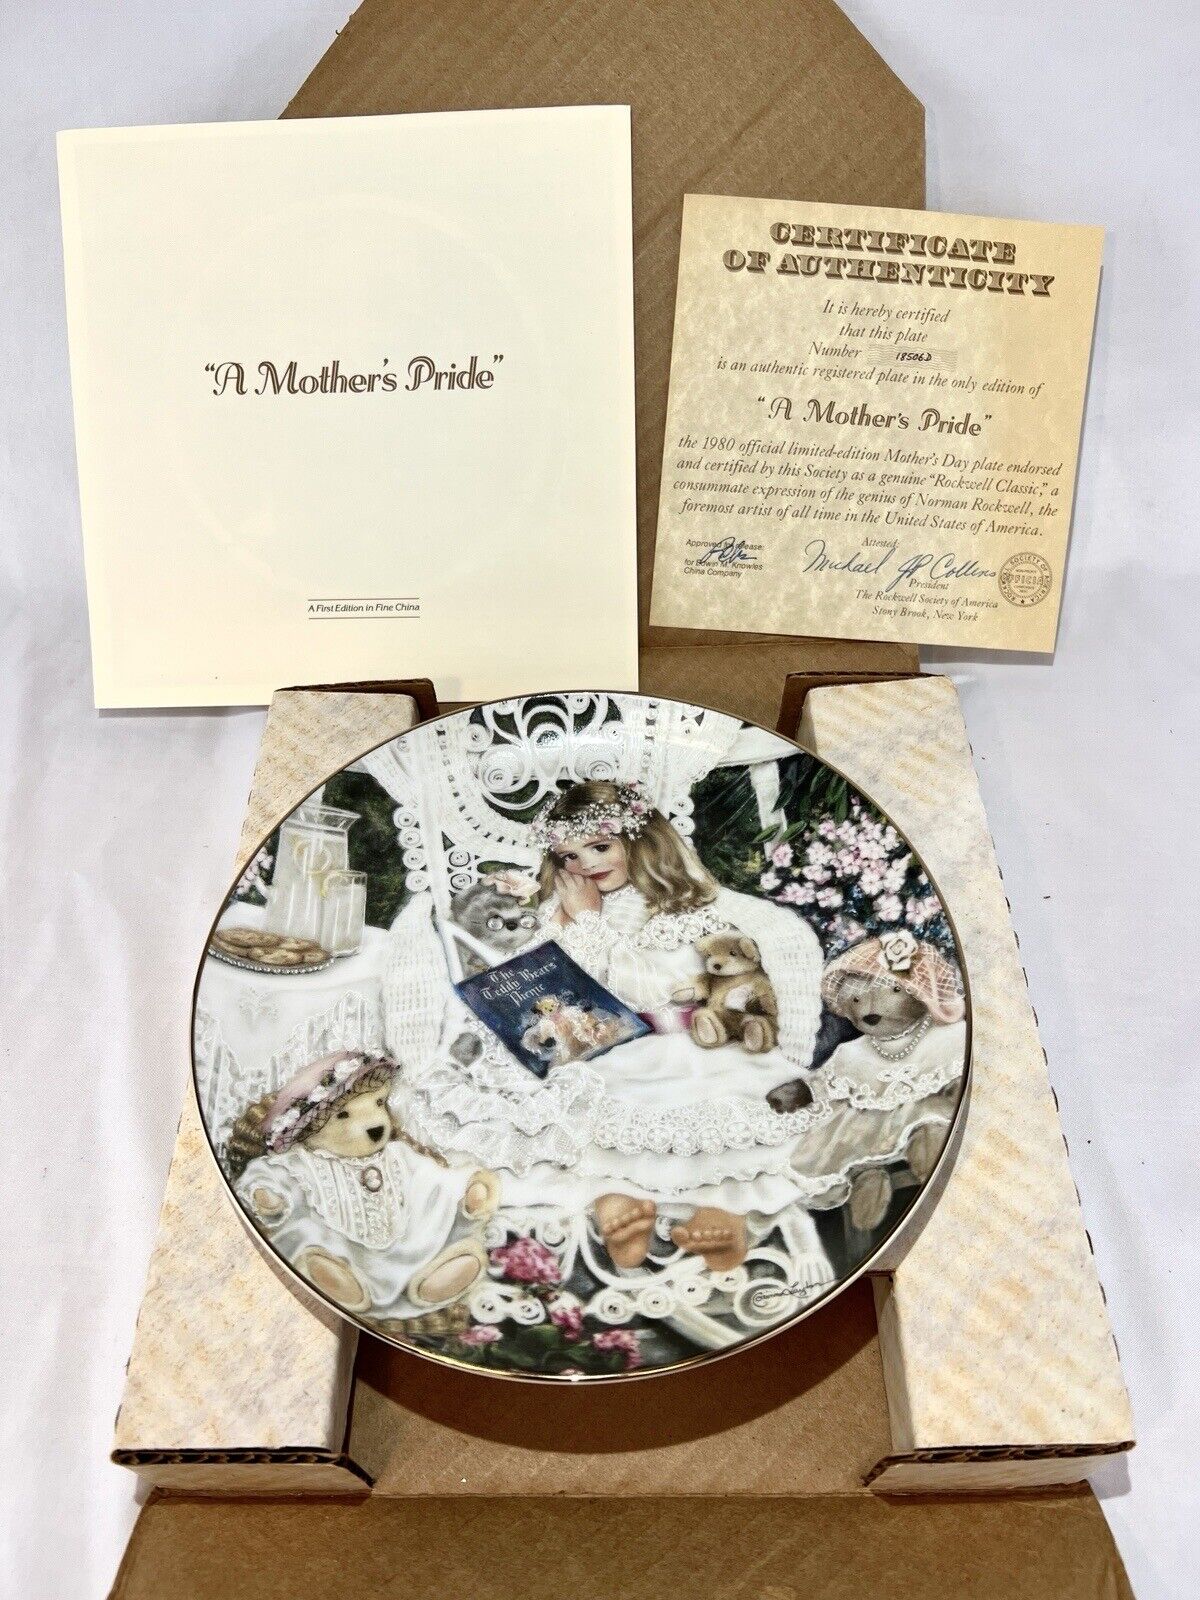 Knowles Edwin M. China Co Limited Edition Plate “bridget” By Gorinne Layton 1990